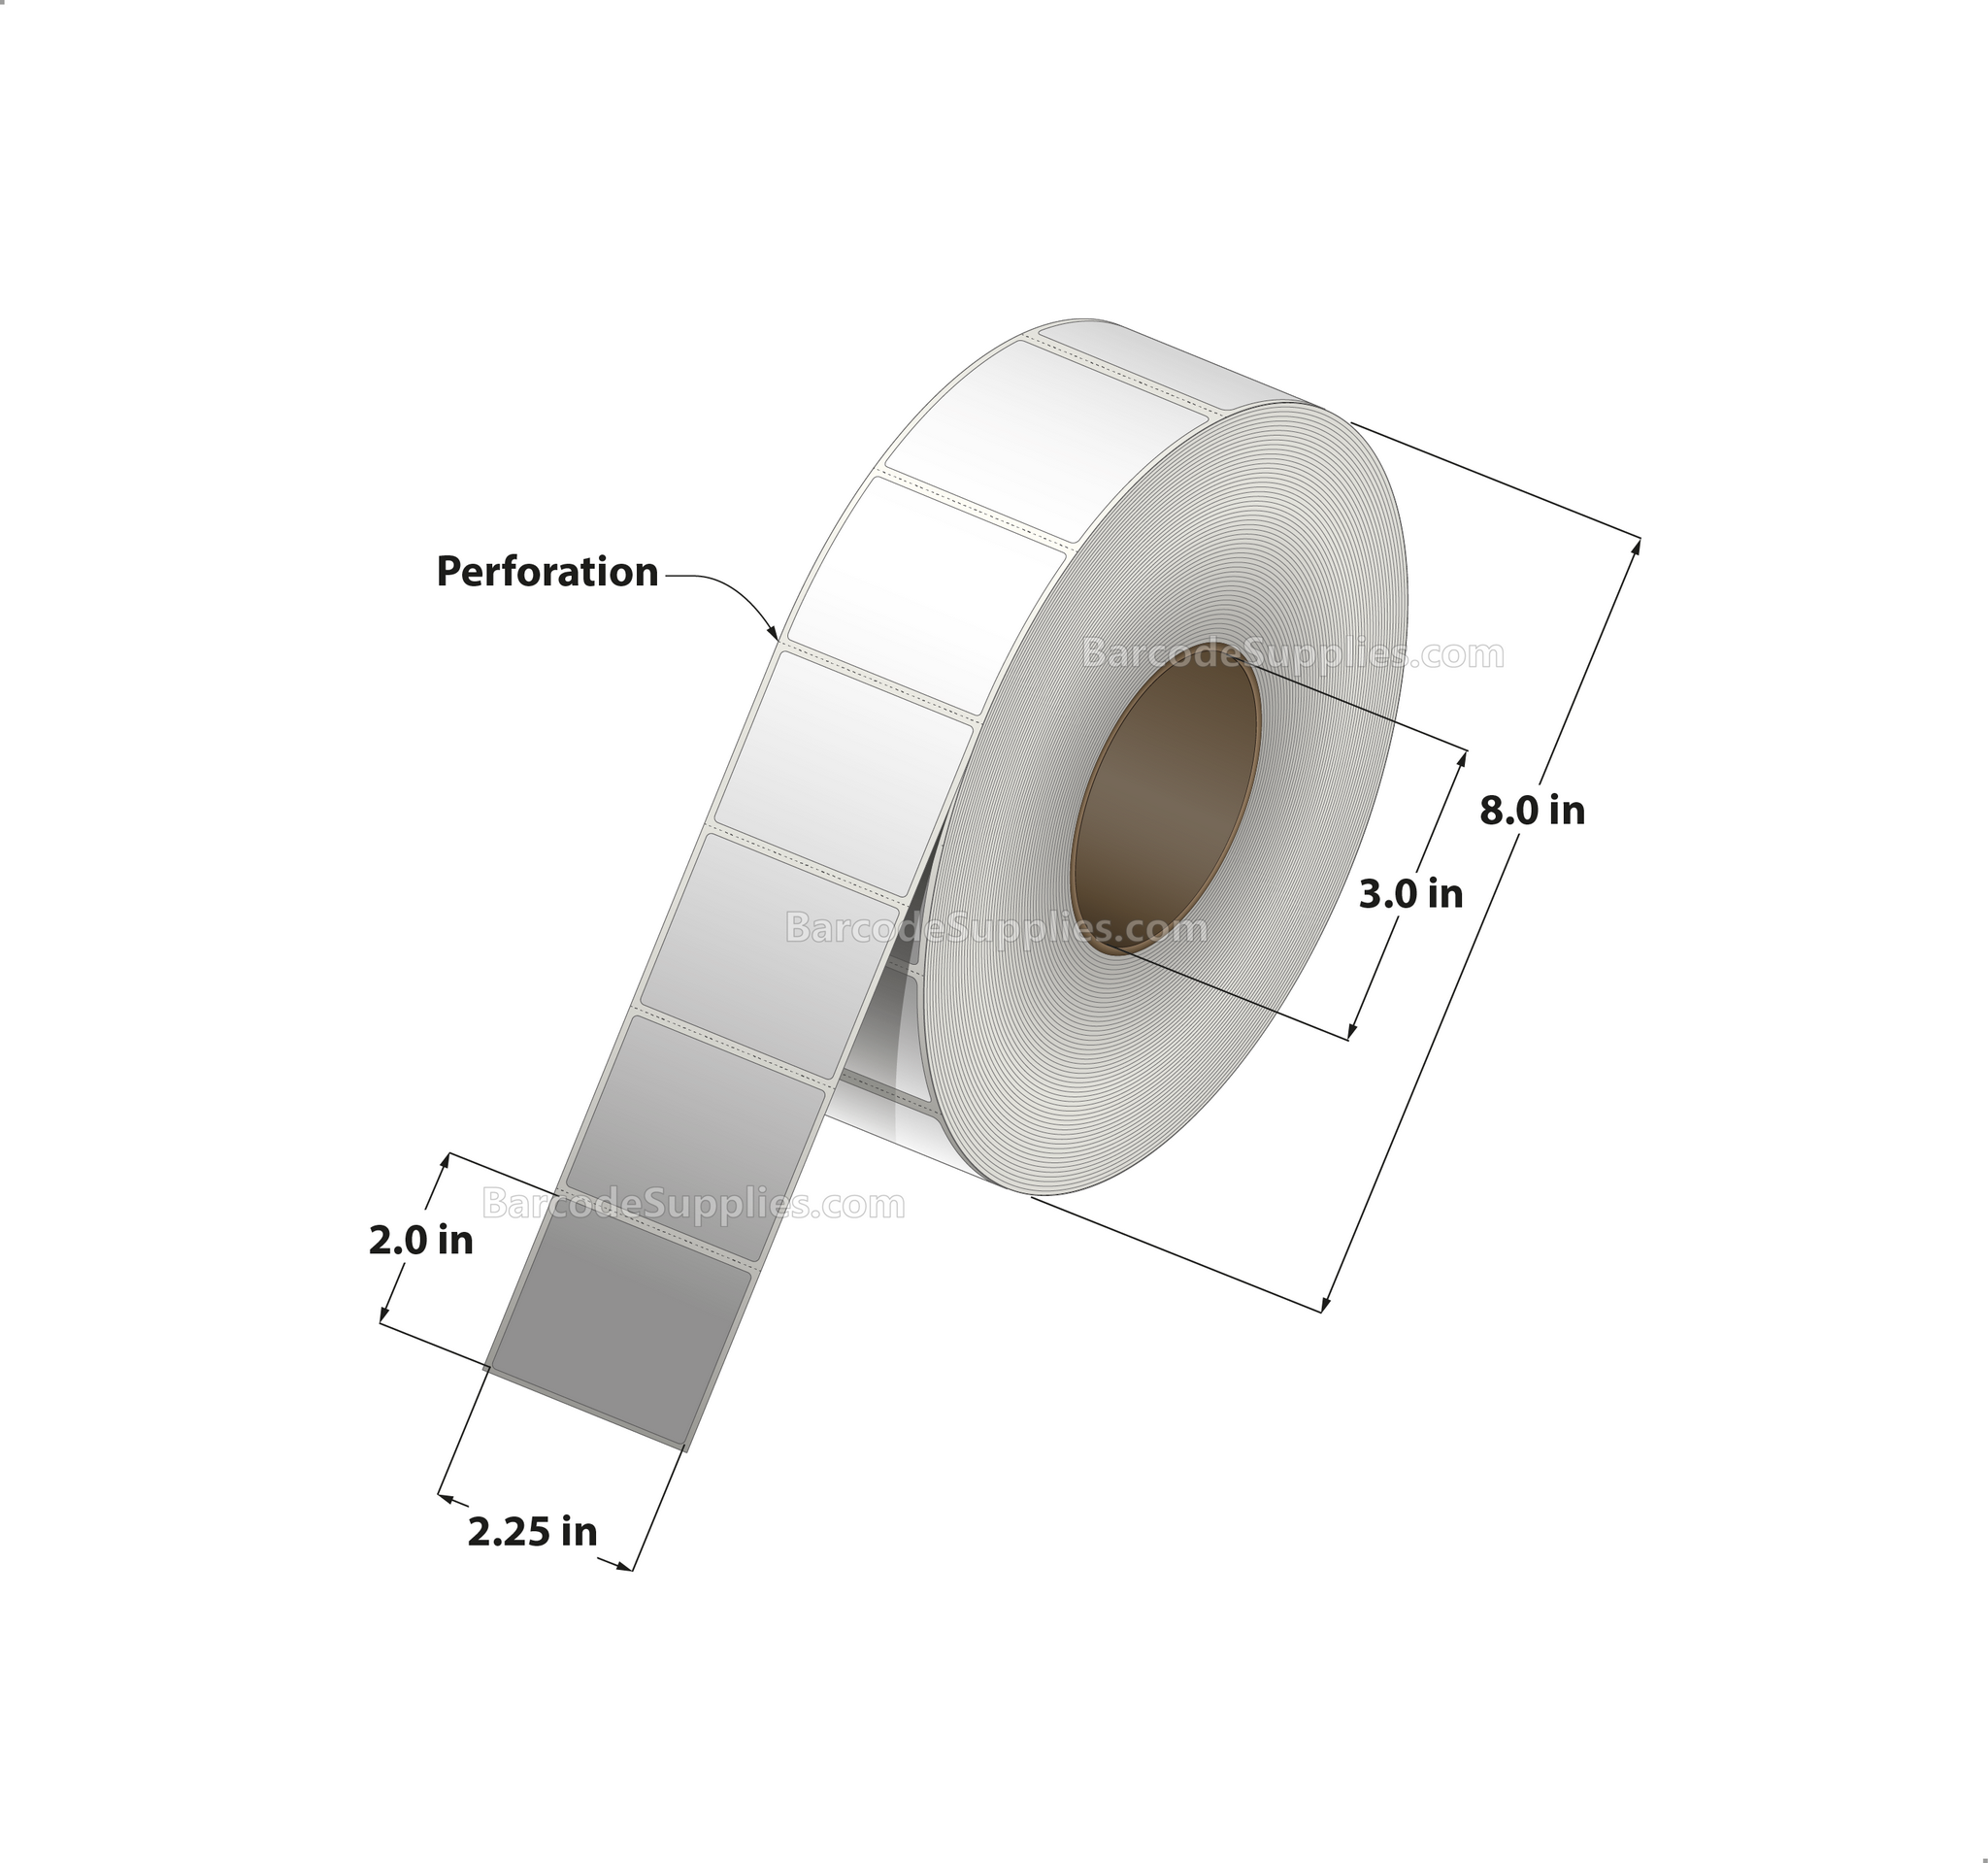 2.25 x 2 Thermal Transfer White Labels With Permanent Adhesive - Perforated - 2900 Labels Per Roll - Carton Of 8 Rolls - 23200 Labels Total - MPN: RT-225-2-2900-3